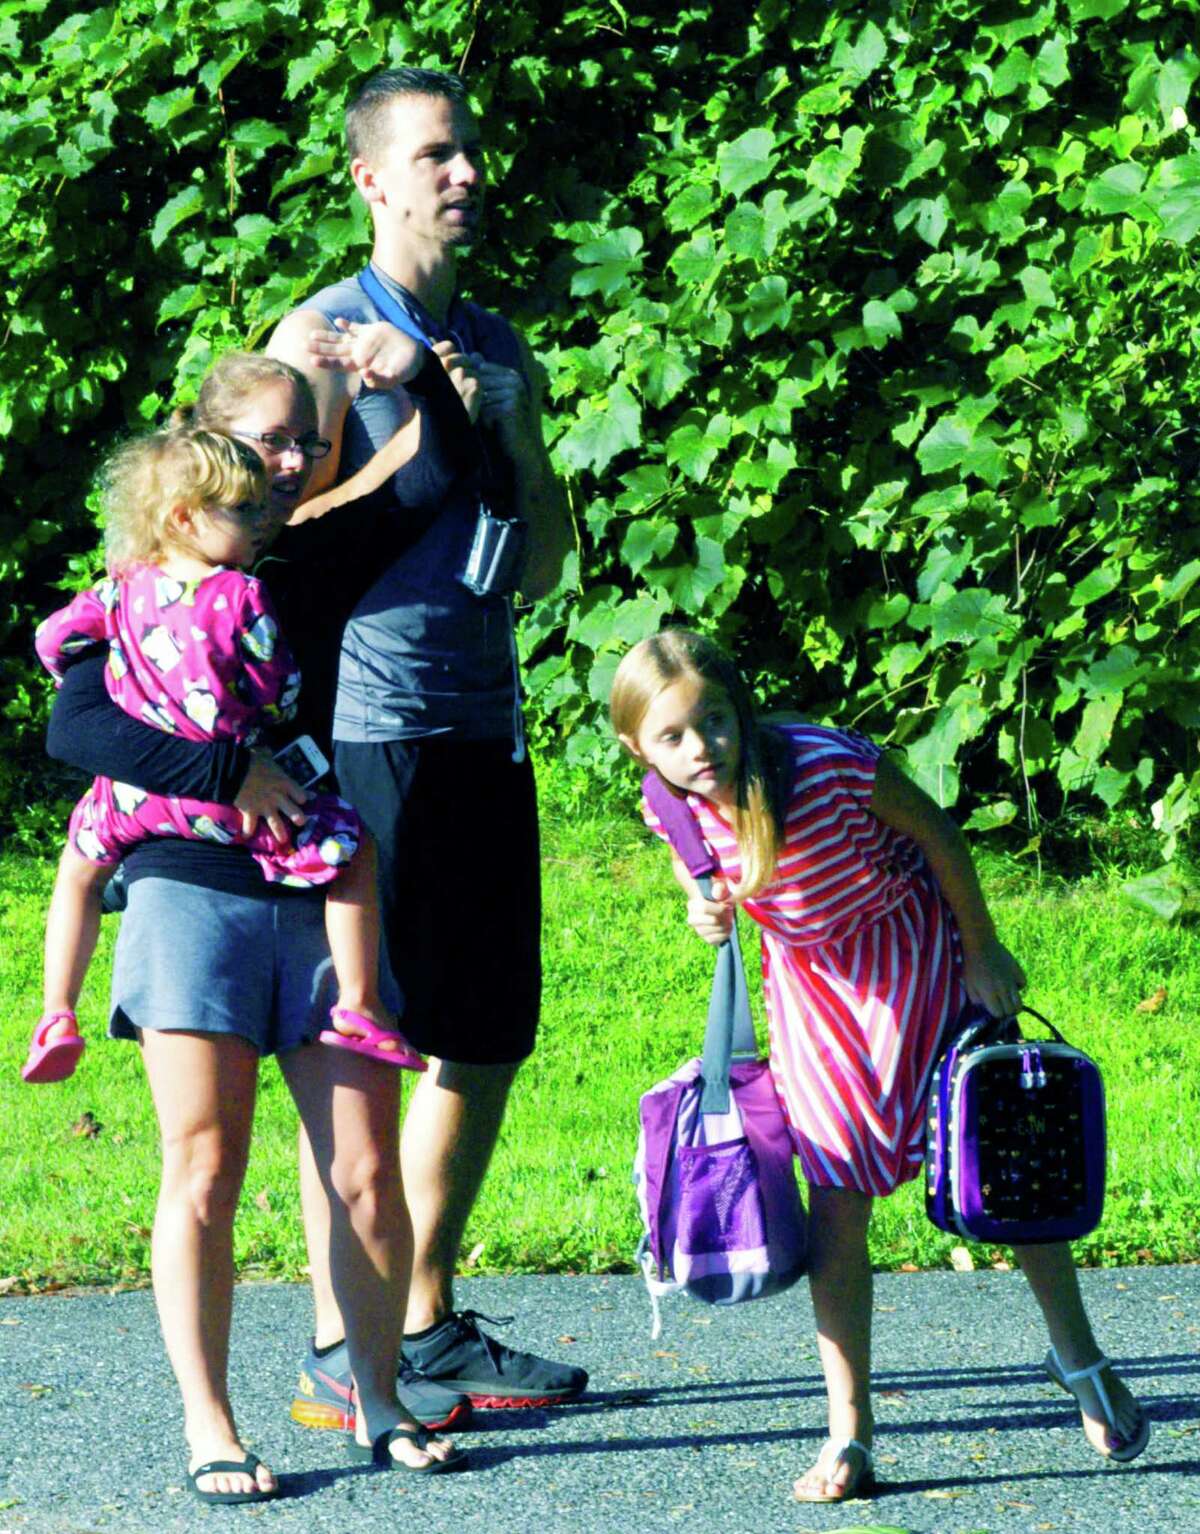 Erinn Williams, 9, a fourth-grader at Sarah Noble Intermeidate School, leans to spot the approach of her school bus on the first day of school in New Milford. There to see her safely off on her educational adventure are her parents, Adriene and Rob Williams, and her younger sister, Mattelyn, 3. Sister Regan, 7, had just boarded her bus to Hill and Plain School.